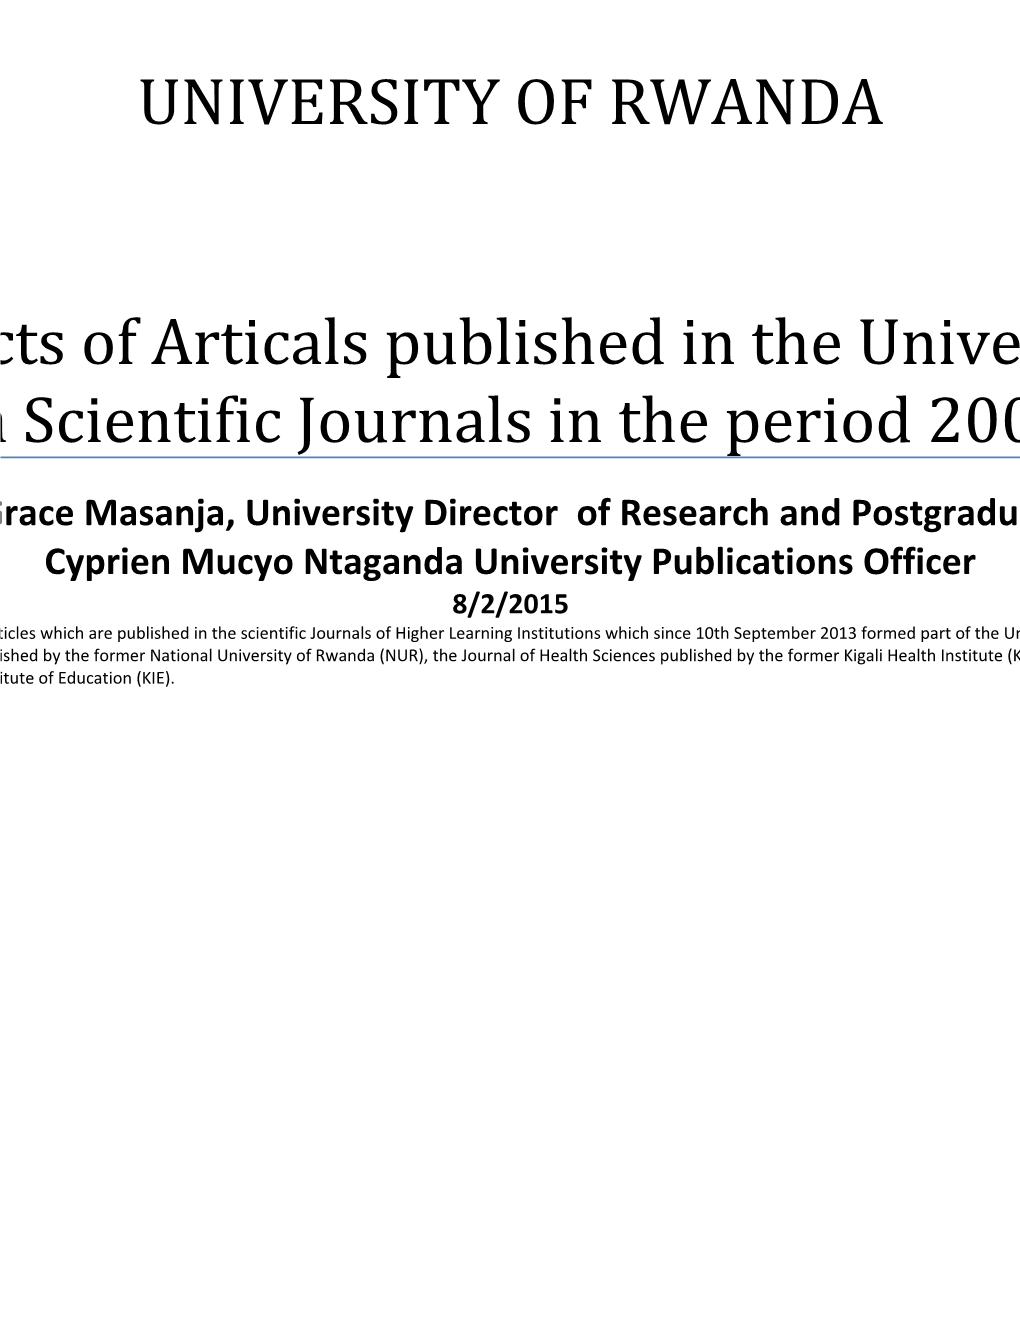 Abstracts Of Articals Published In The University Of Rwanda Scientific Journals In The Period 2000-2013